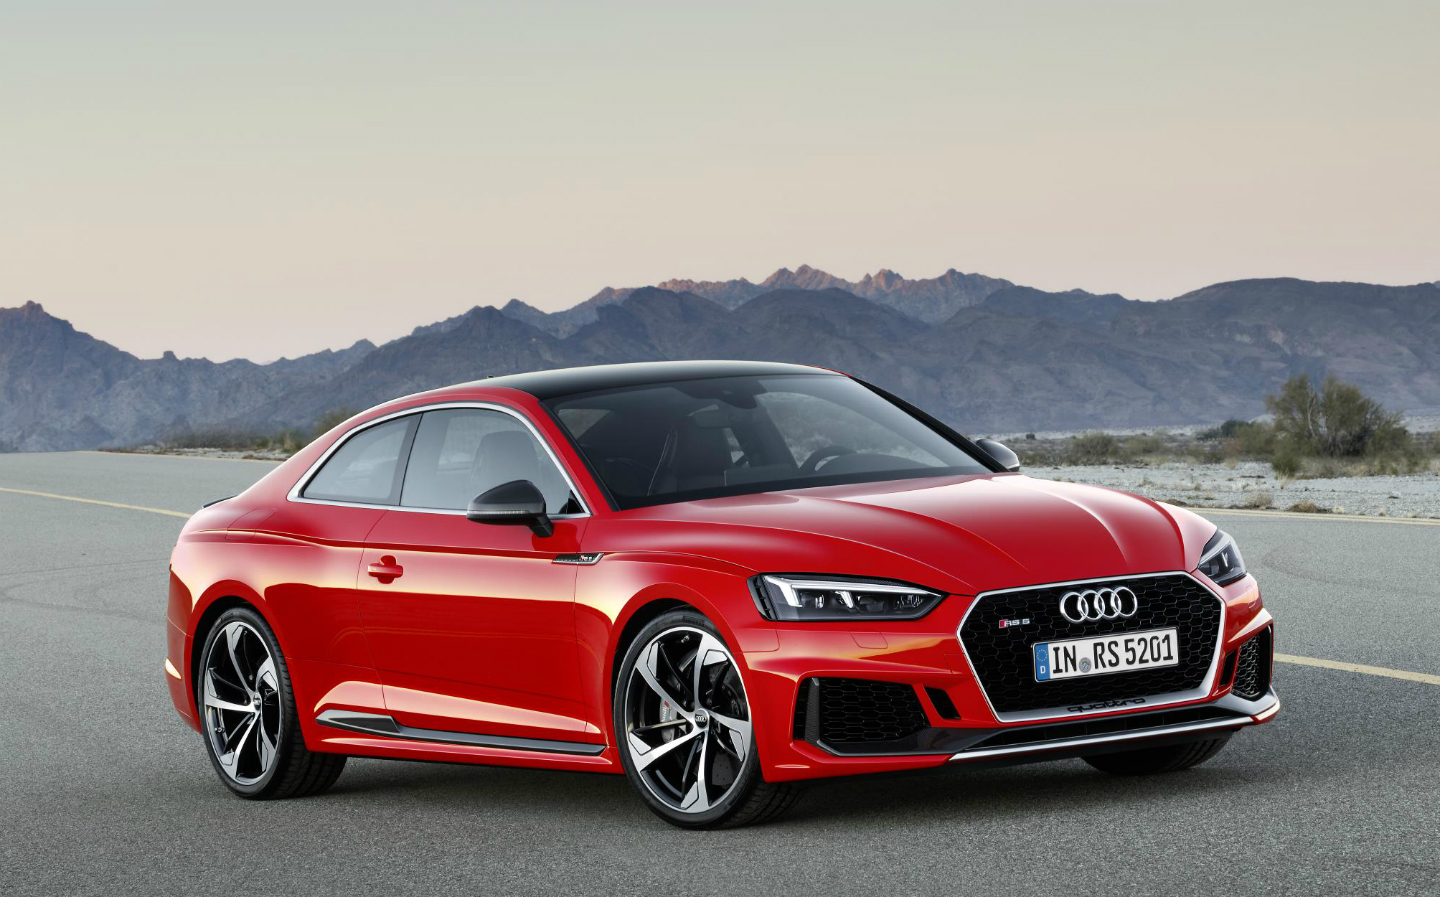 Audi RS5: hot coupé 2017 to take on BMW M4